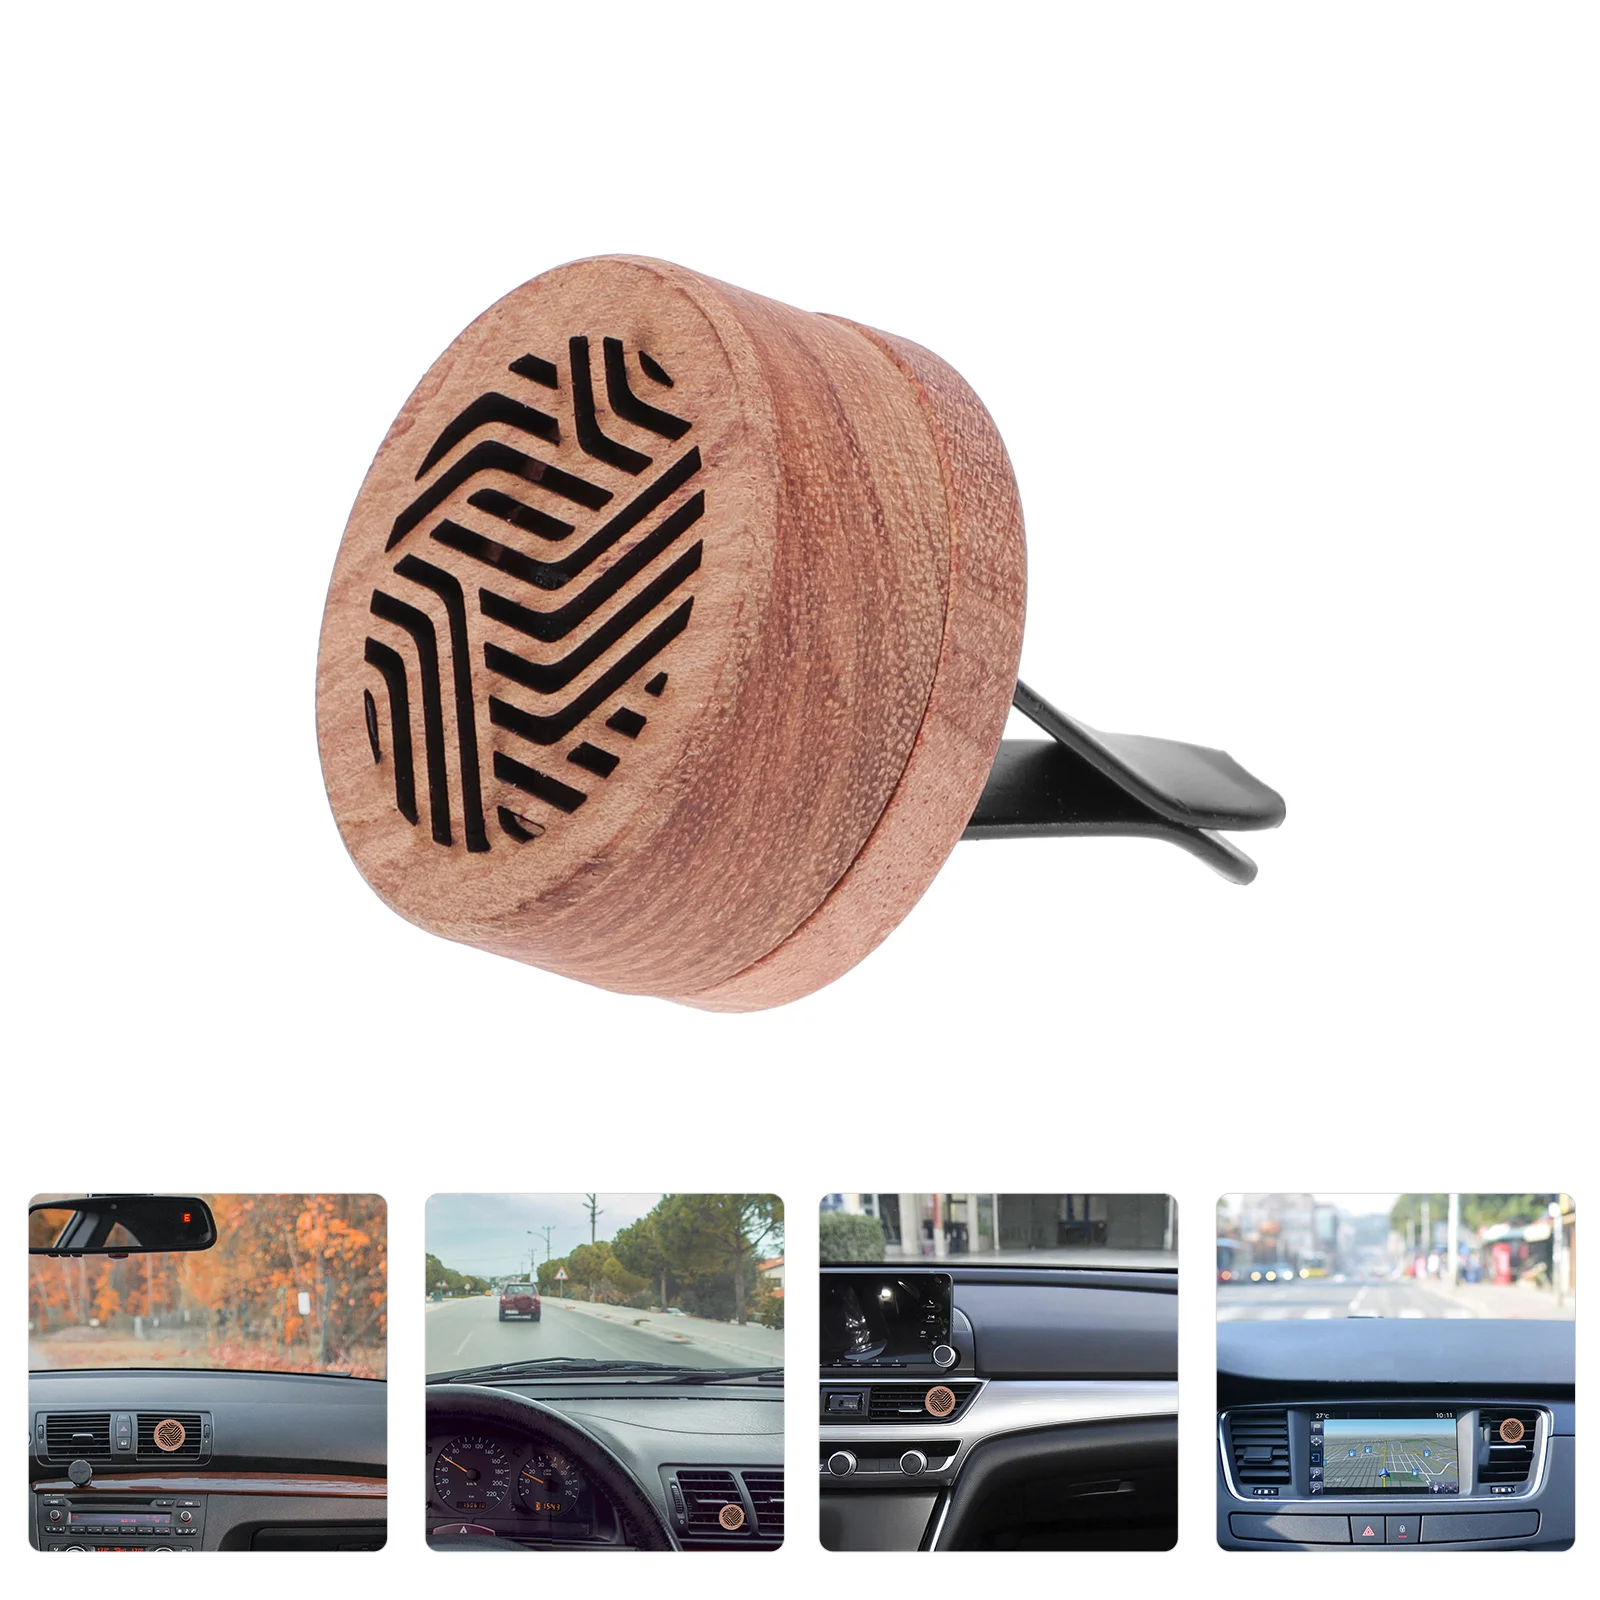 

Diffuser Car Vent Clip Clips Oil Wood Essential Aromatherapy Aroma Perfume Wooden Air Decorative Diffusers Home Scent Ornament